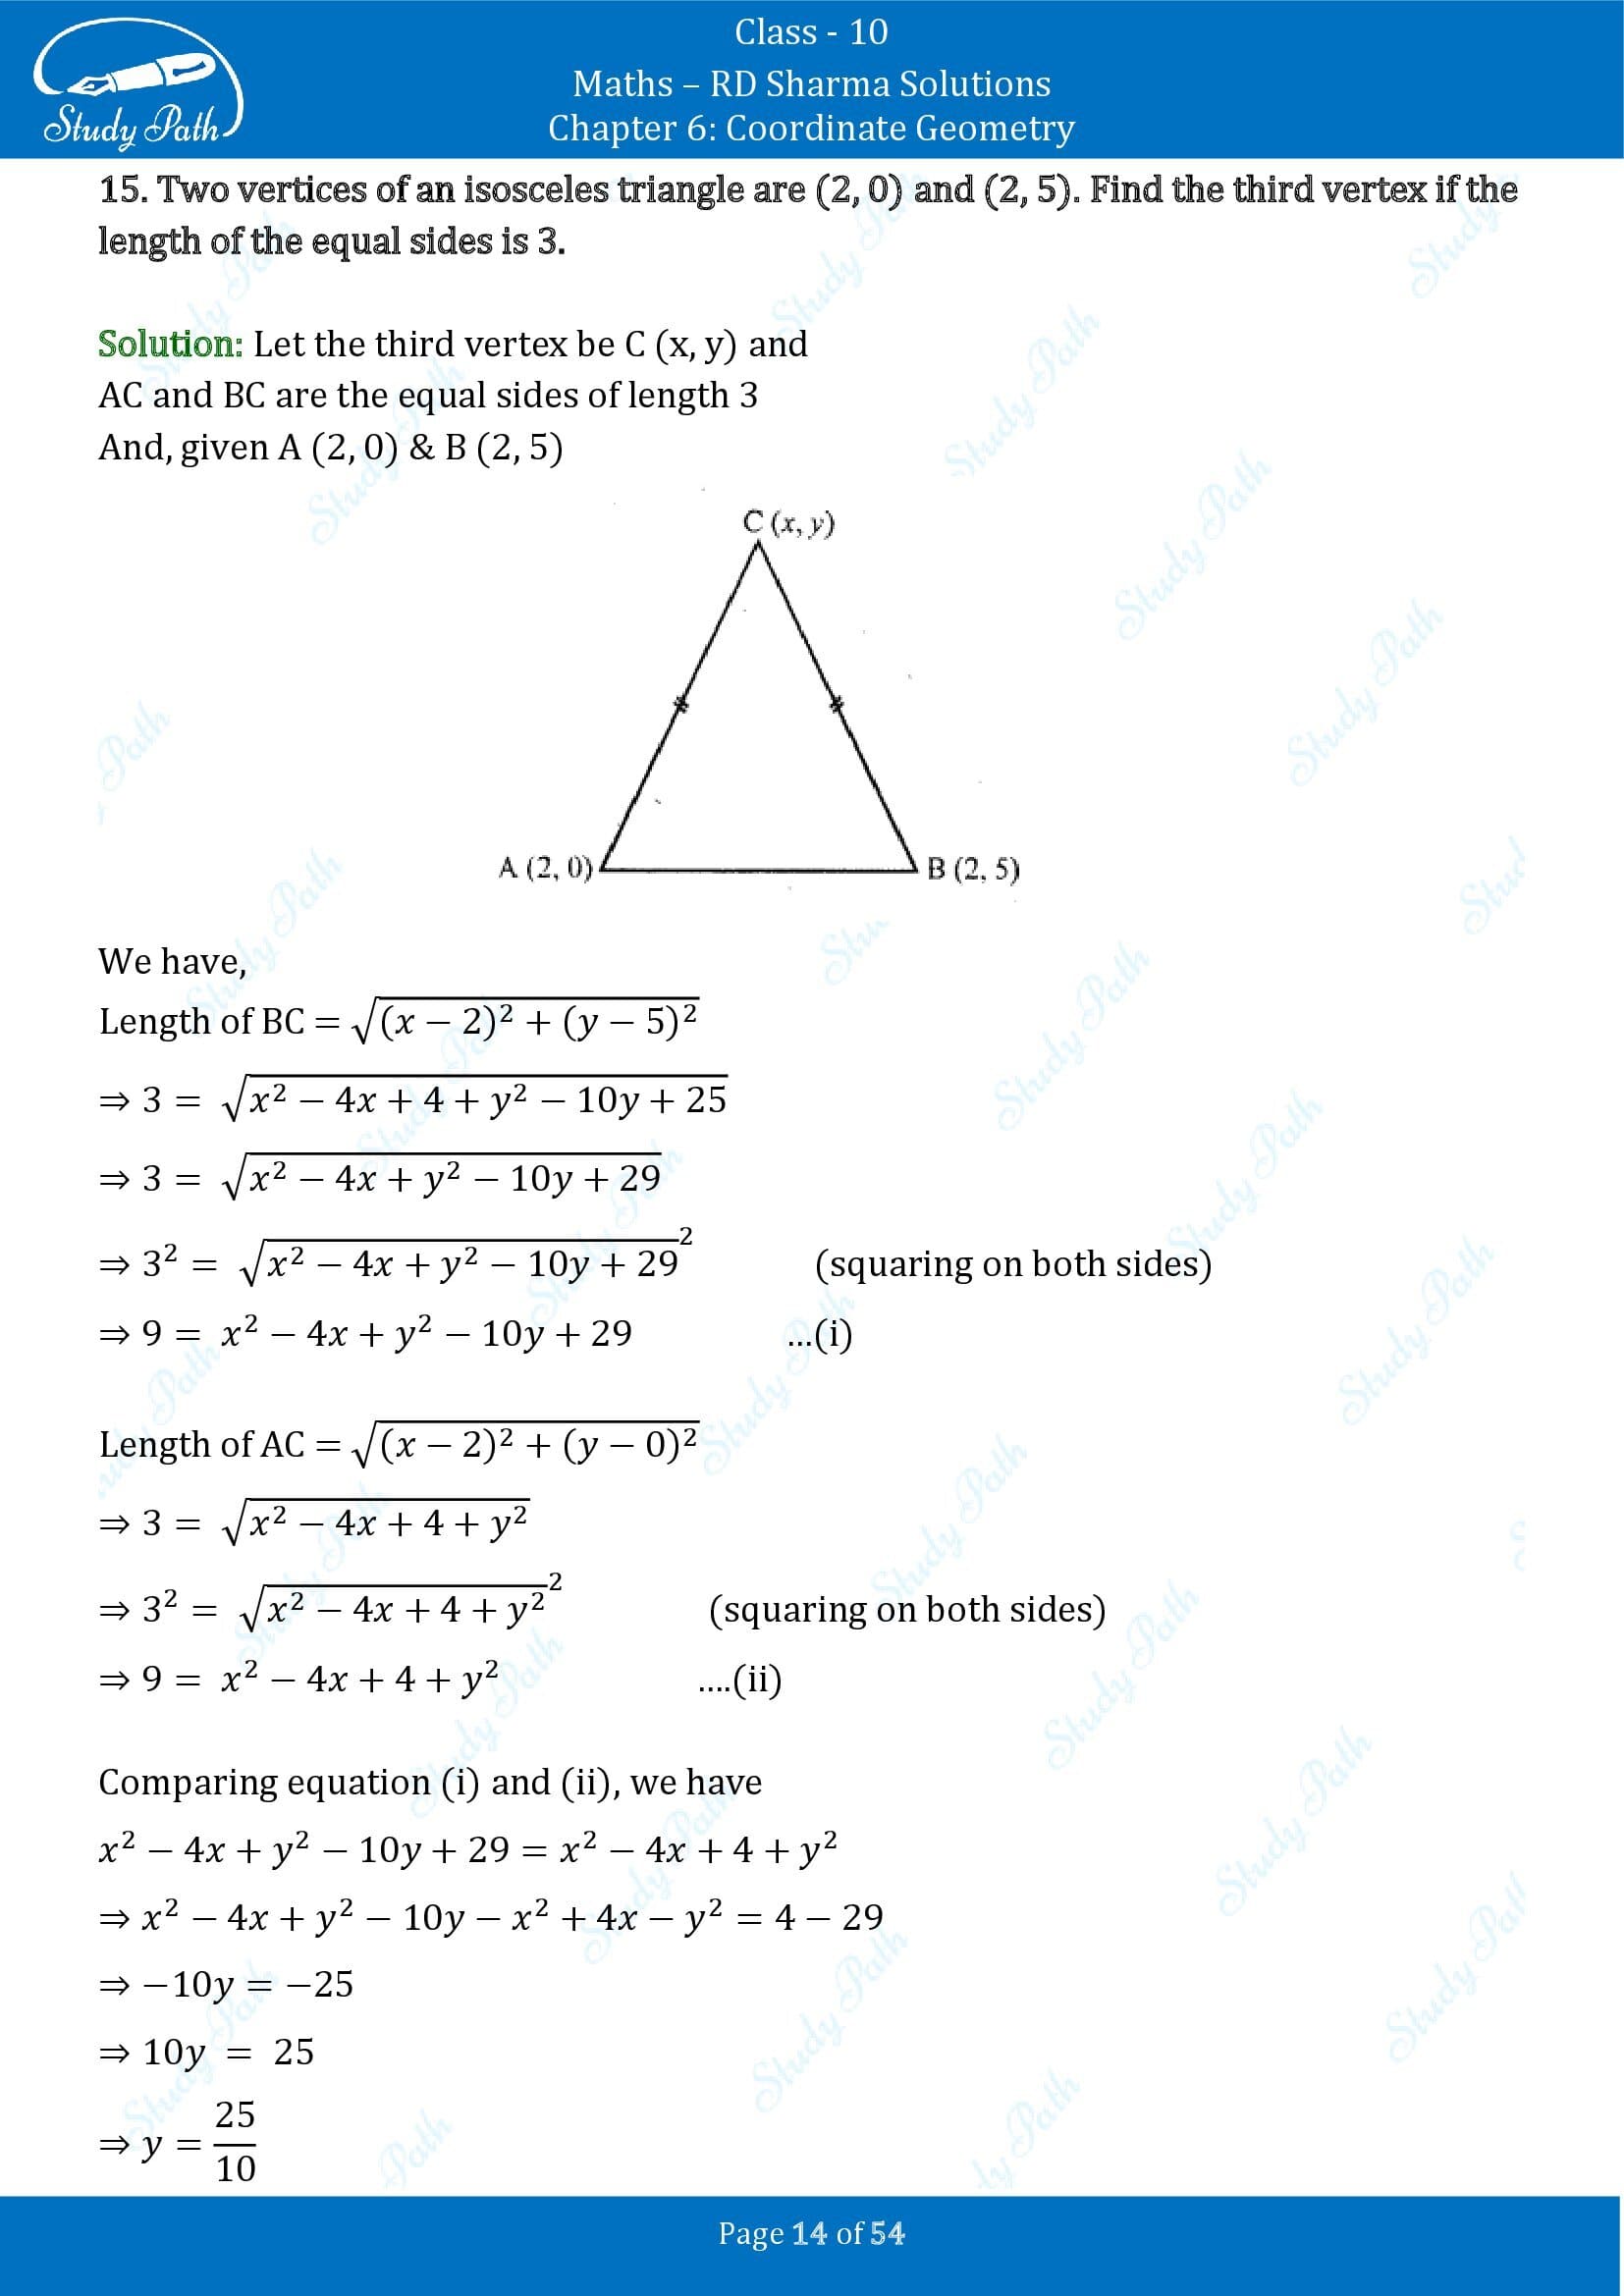 RD Sharma Solutions Class 10 Chapter 6 Coordinate Geometry Exercise 6.2 0014